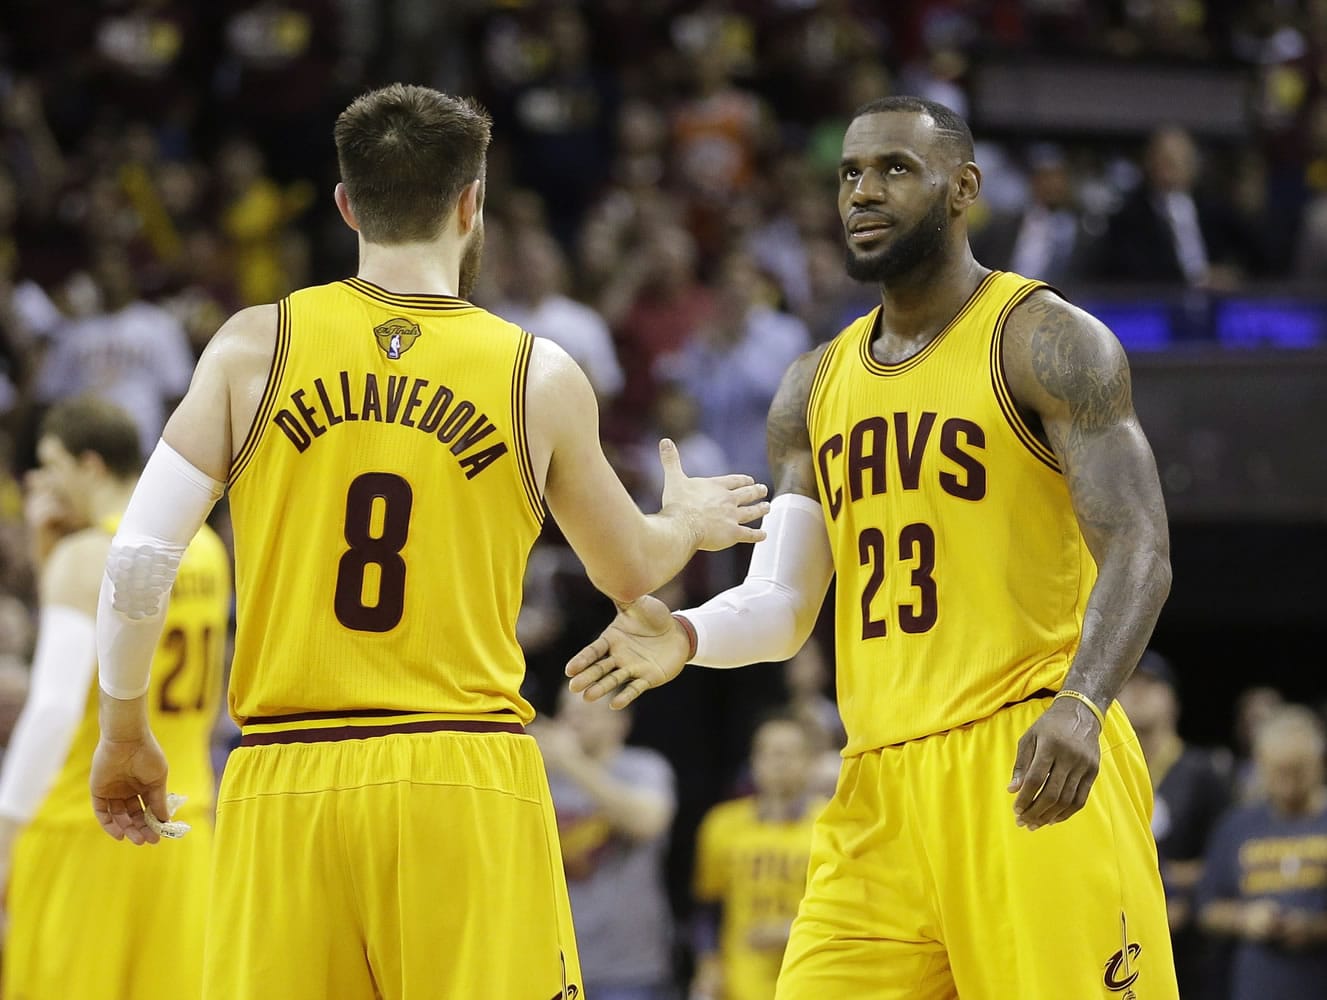 Cleveland Cavaliers forward LeBron James (23) celebrates with teammate Matthew Dellavedova during the second half of Game 3 of the NBA Finals against the Golden State Warriors in Cleveland, Tuesday.